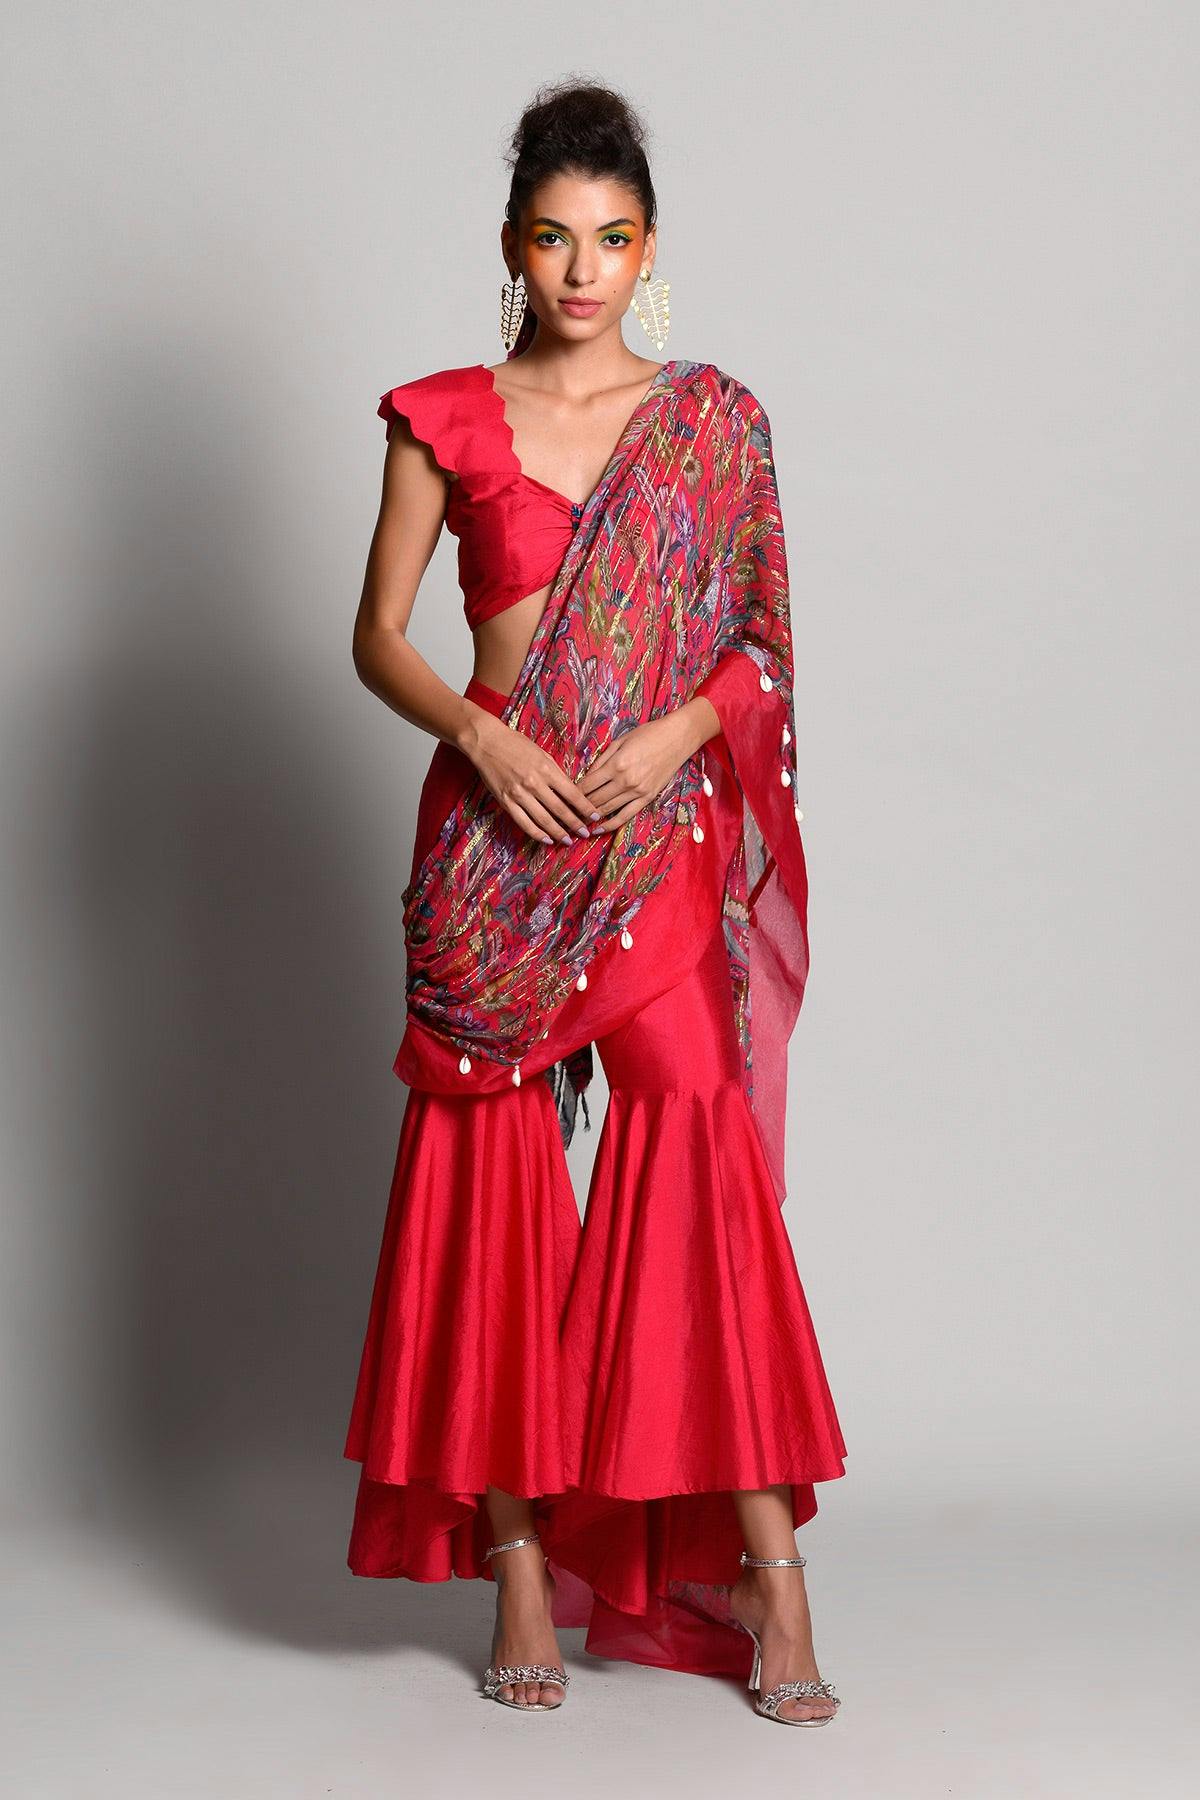 Date Pant Saree, a product by Rishi and Vibhuti